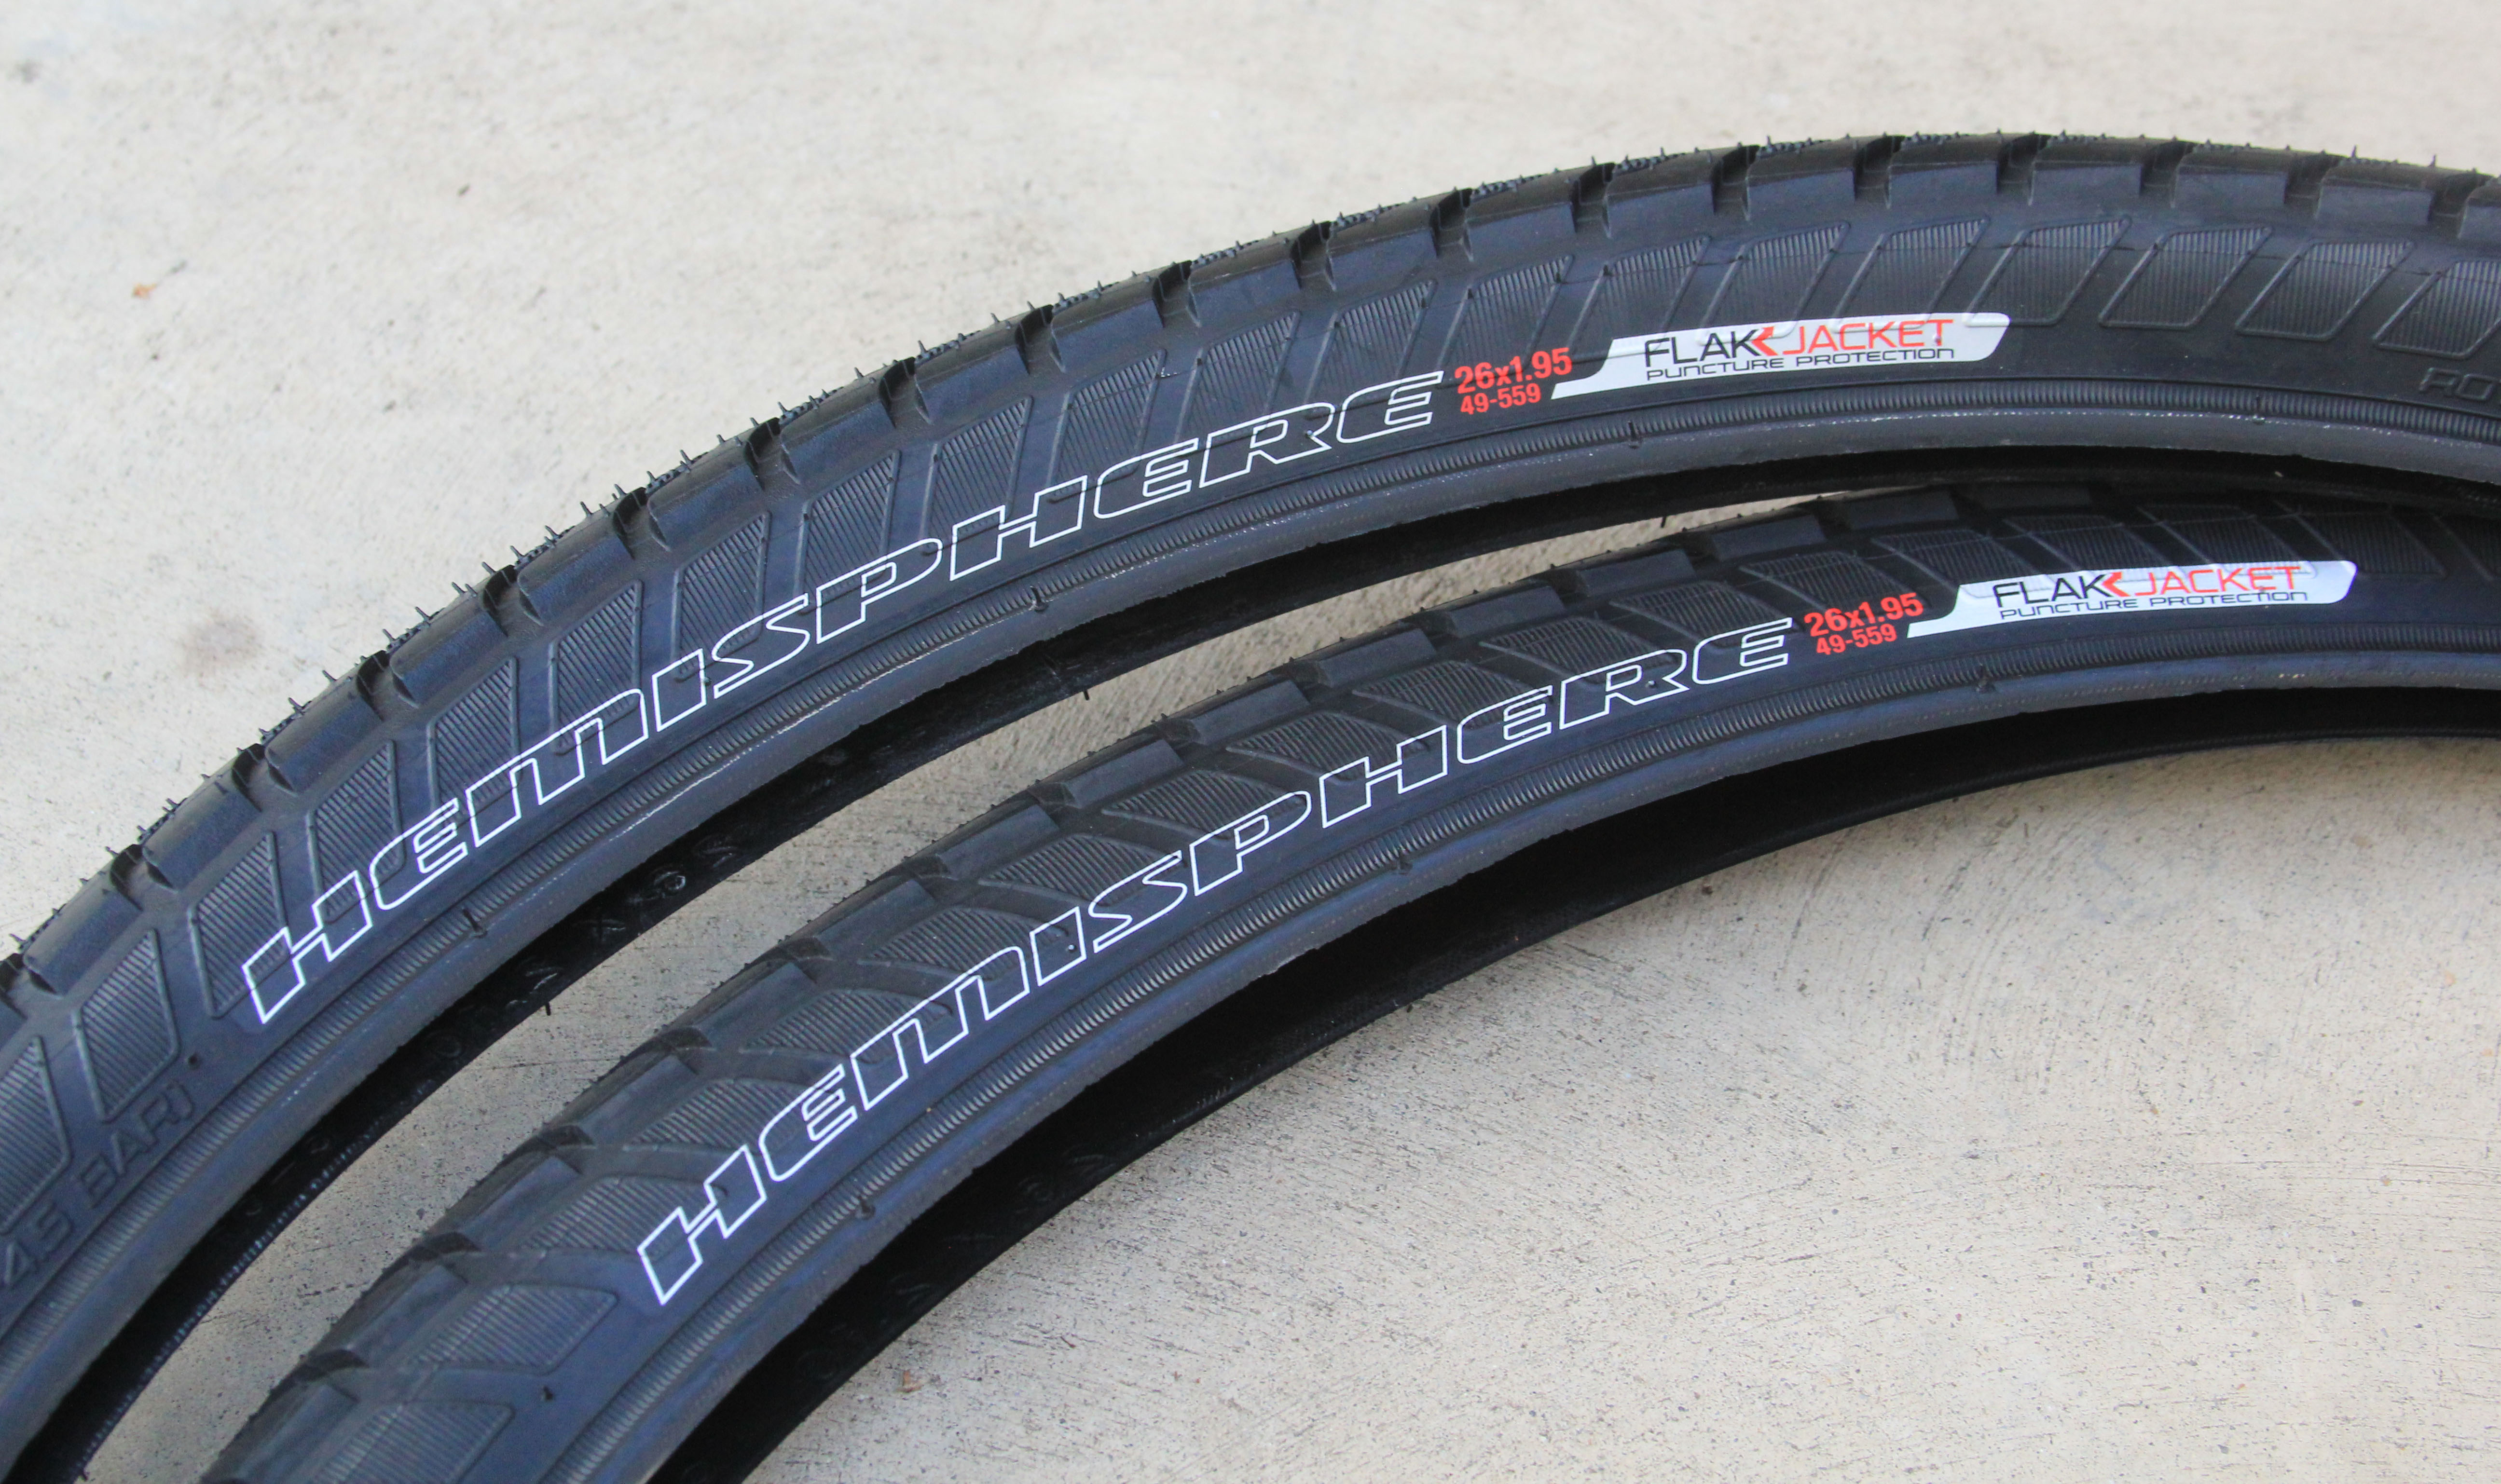 specialized road bike tires